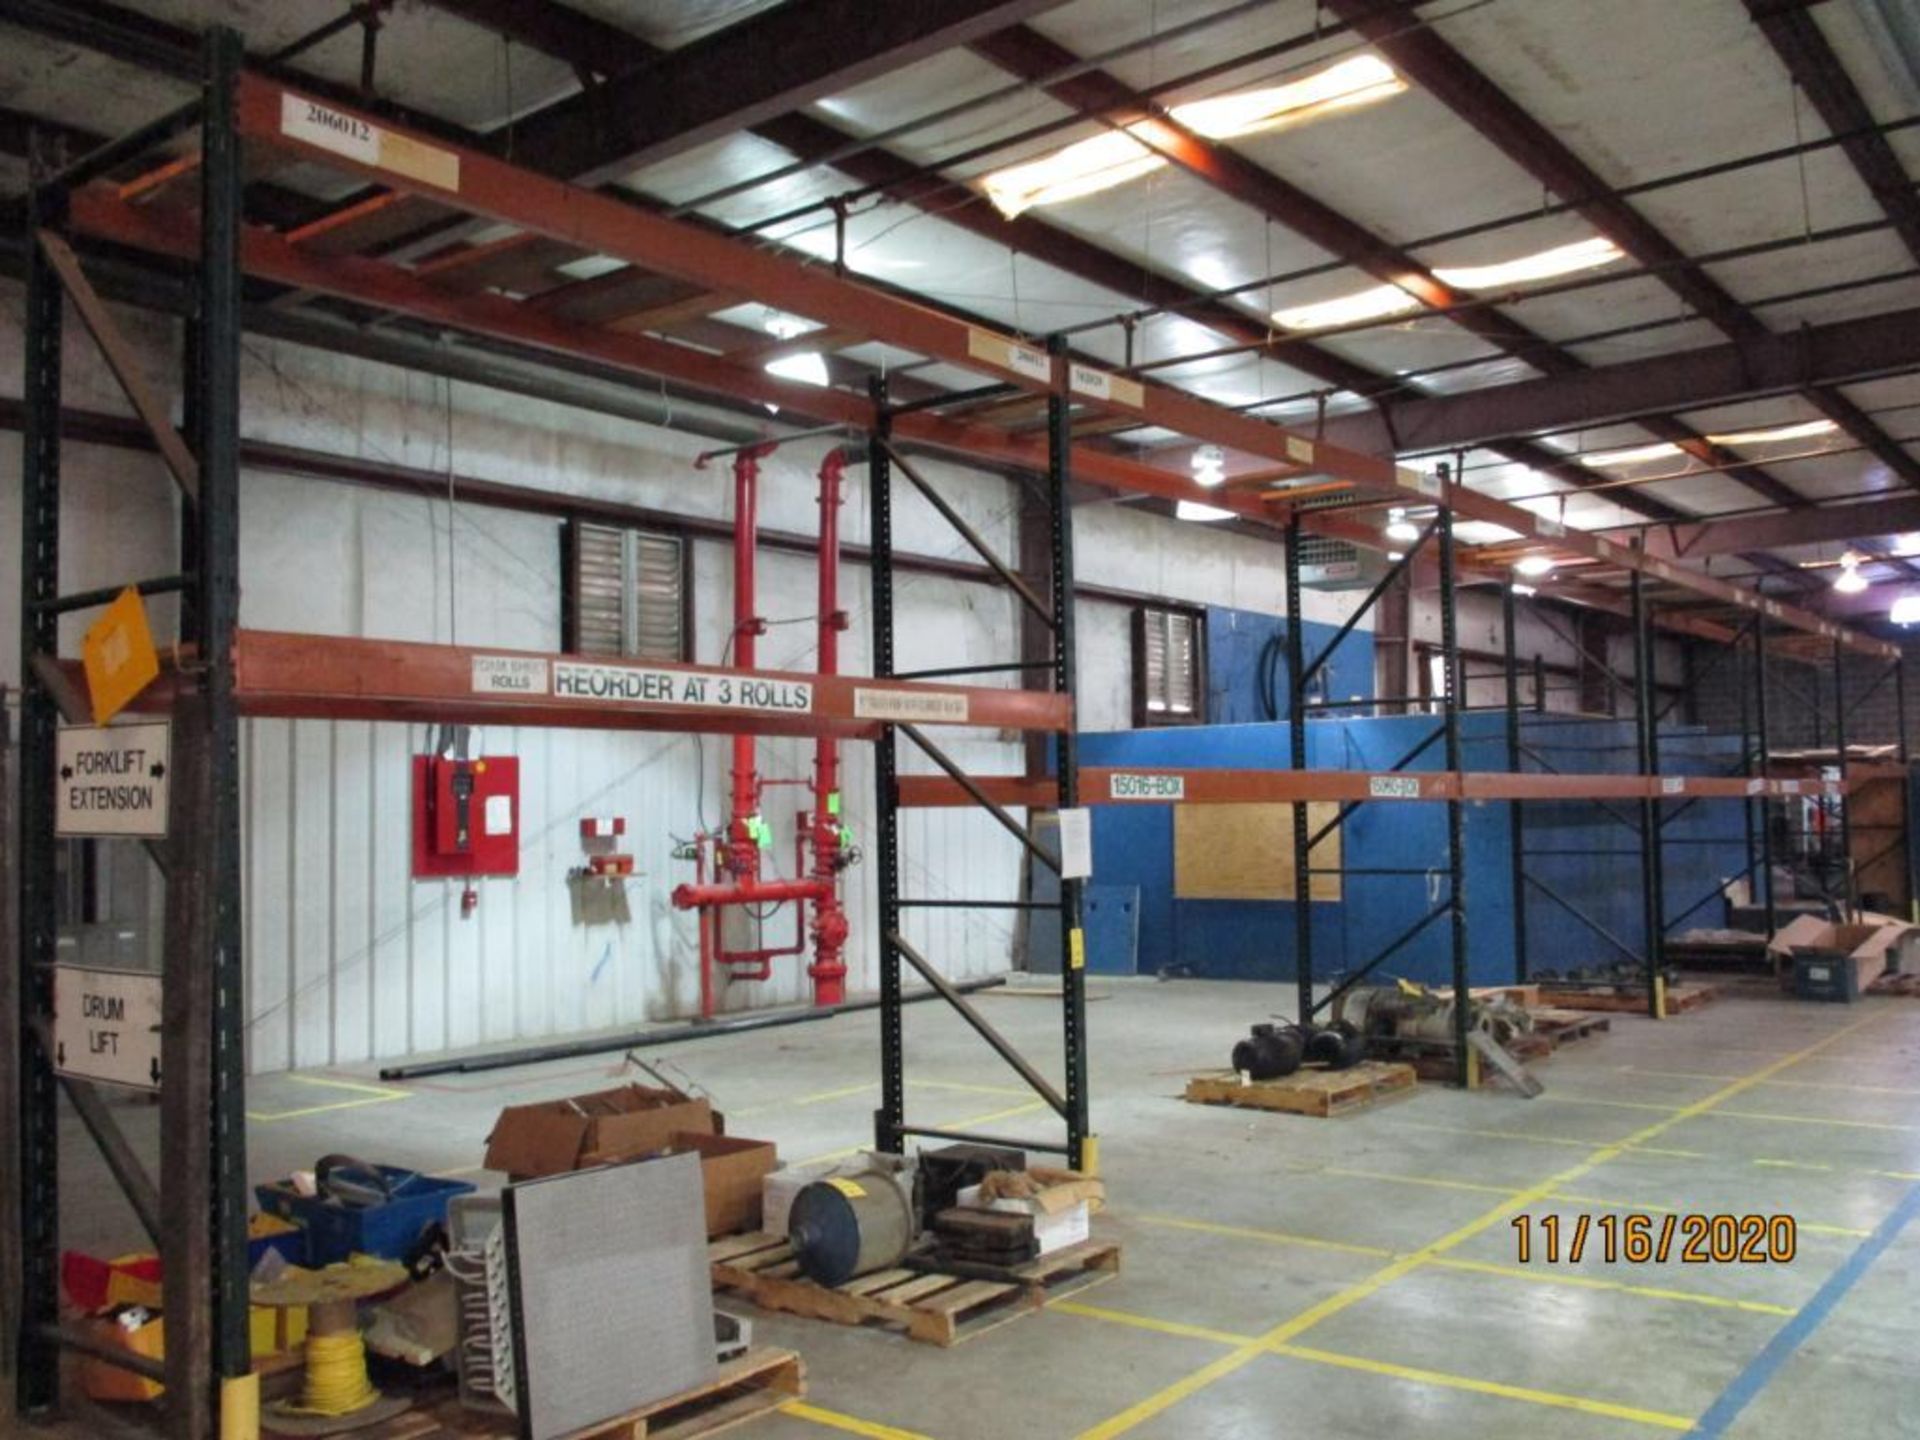 LOT: (6) Sections 12 ft. Wide x 42 in. Deep x 12 ft. High 2-Tier Pallet Rack, 6670 lb. Capacity